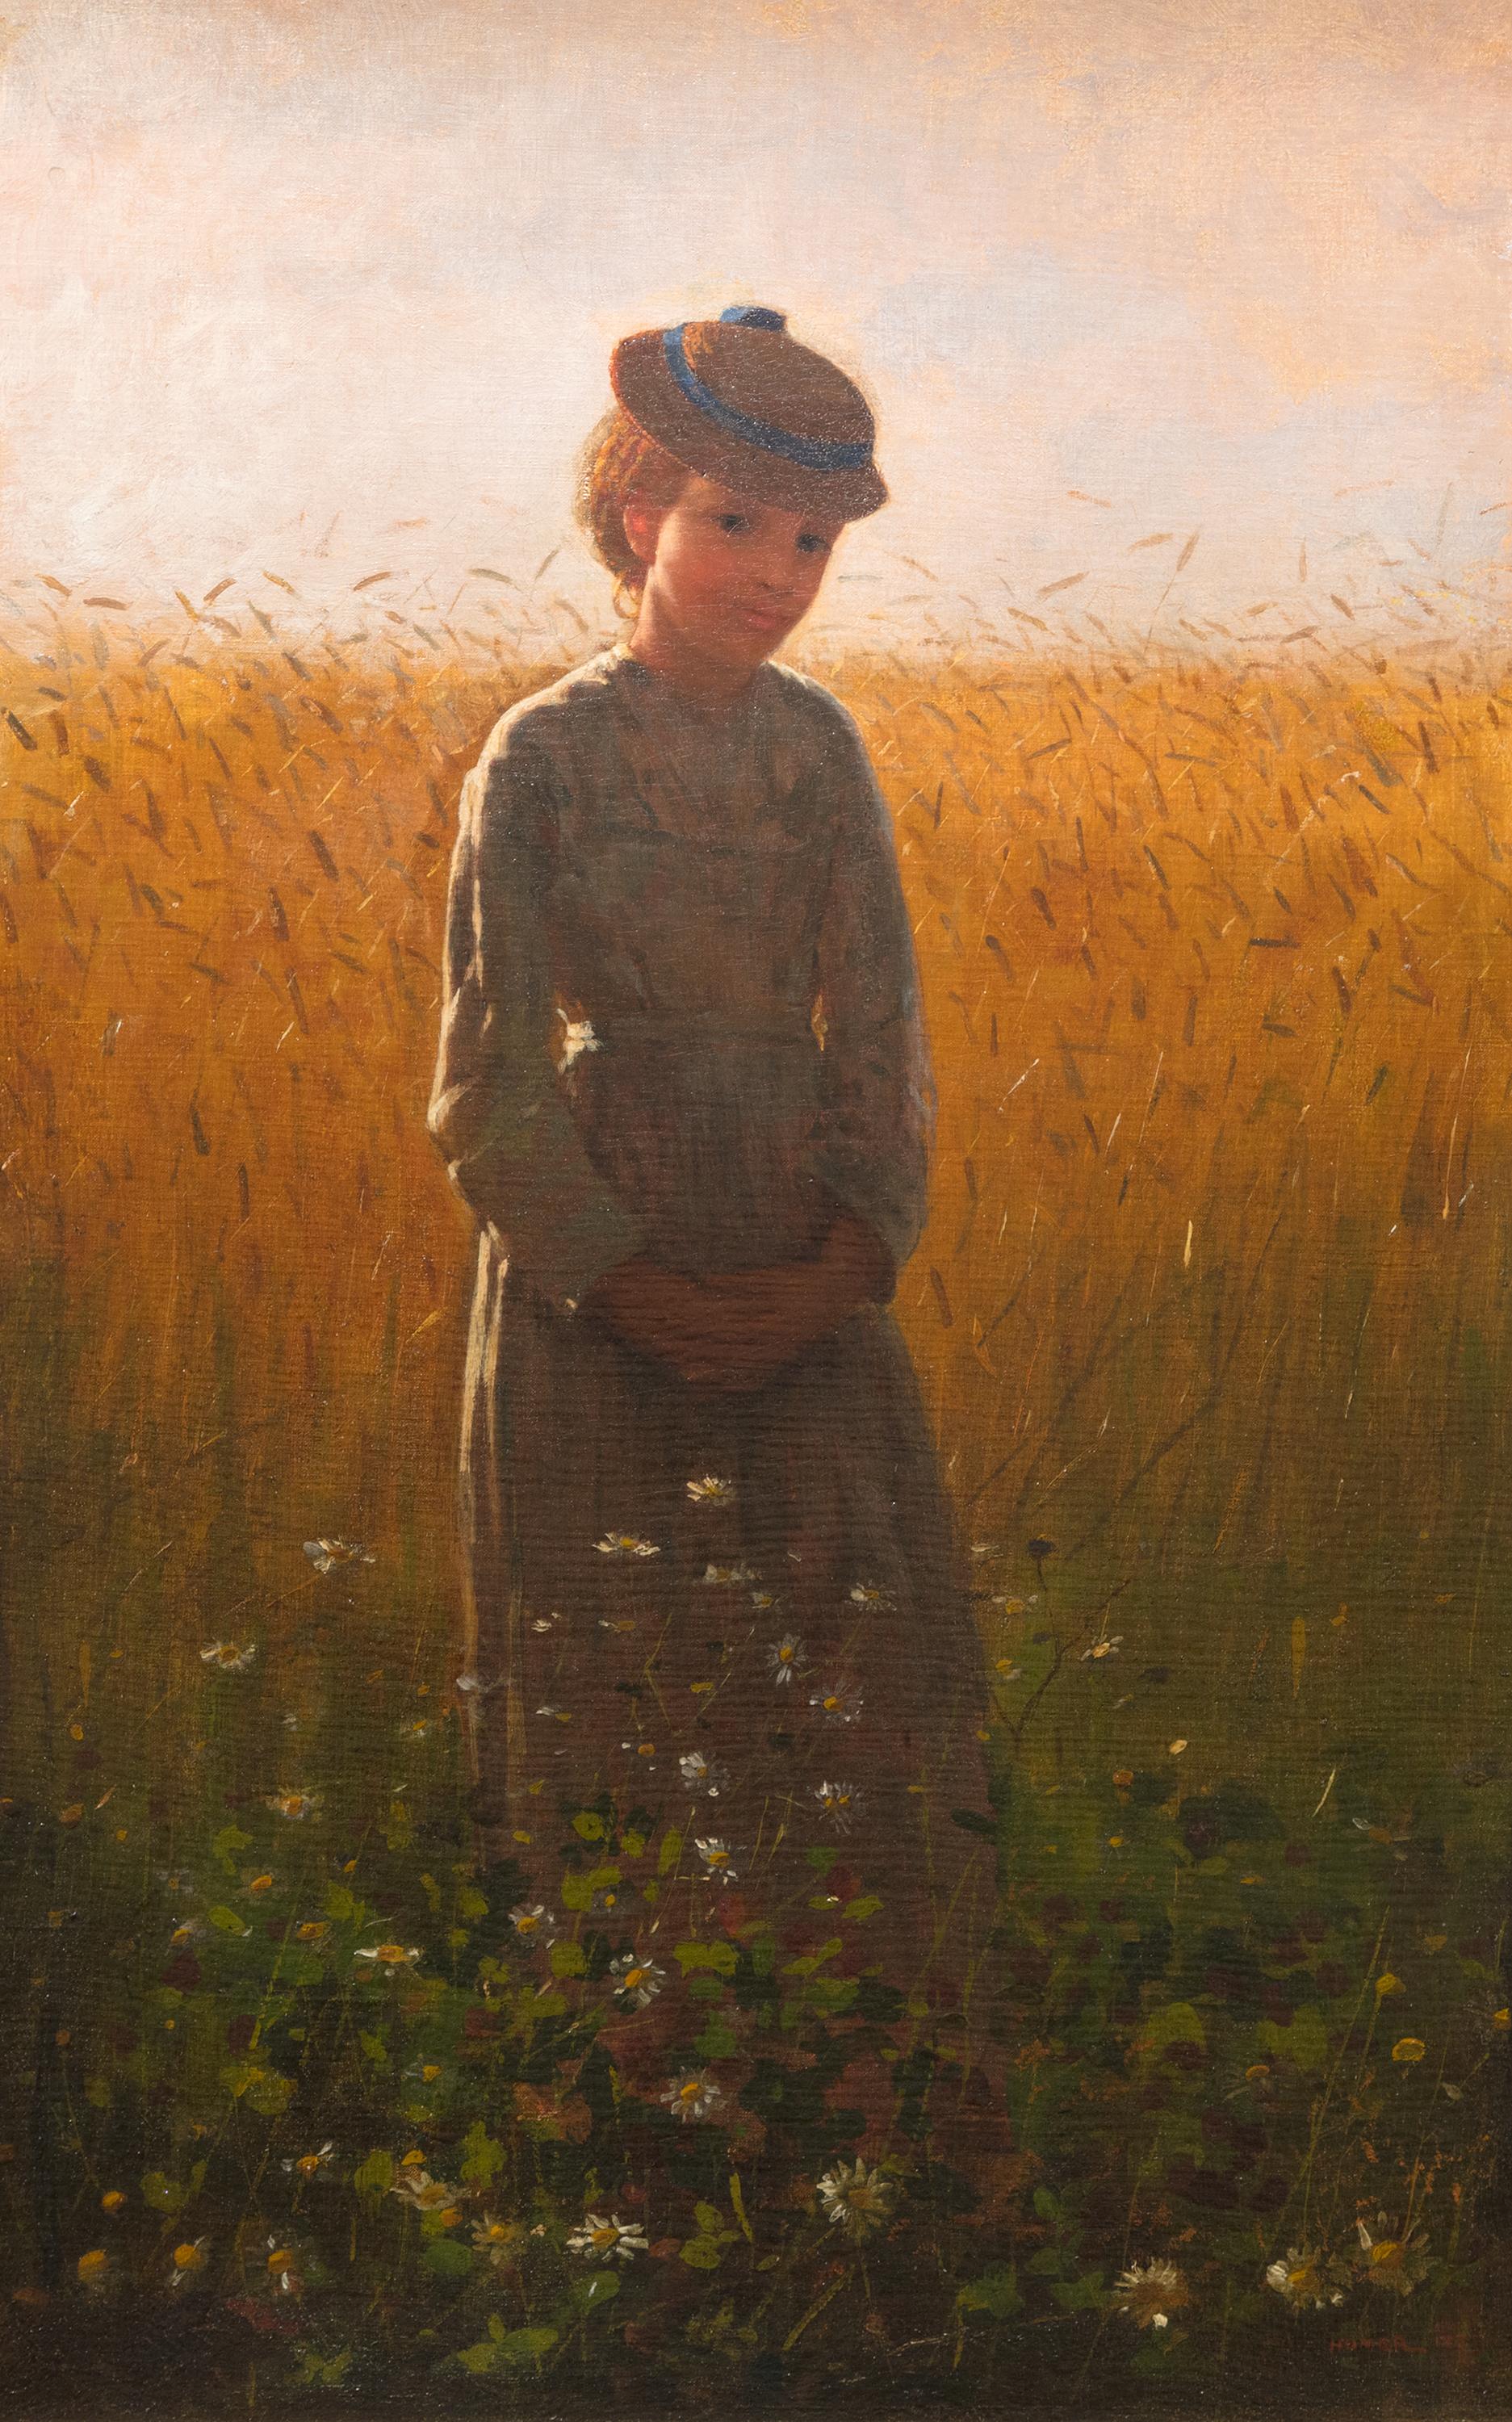 In the Wheatfield (Girl Standing in a Wheat Field) - Painting by Winslow Homer